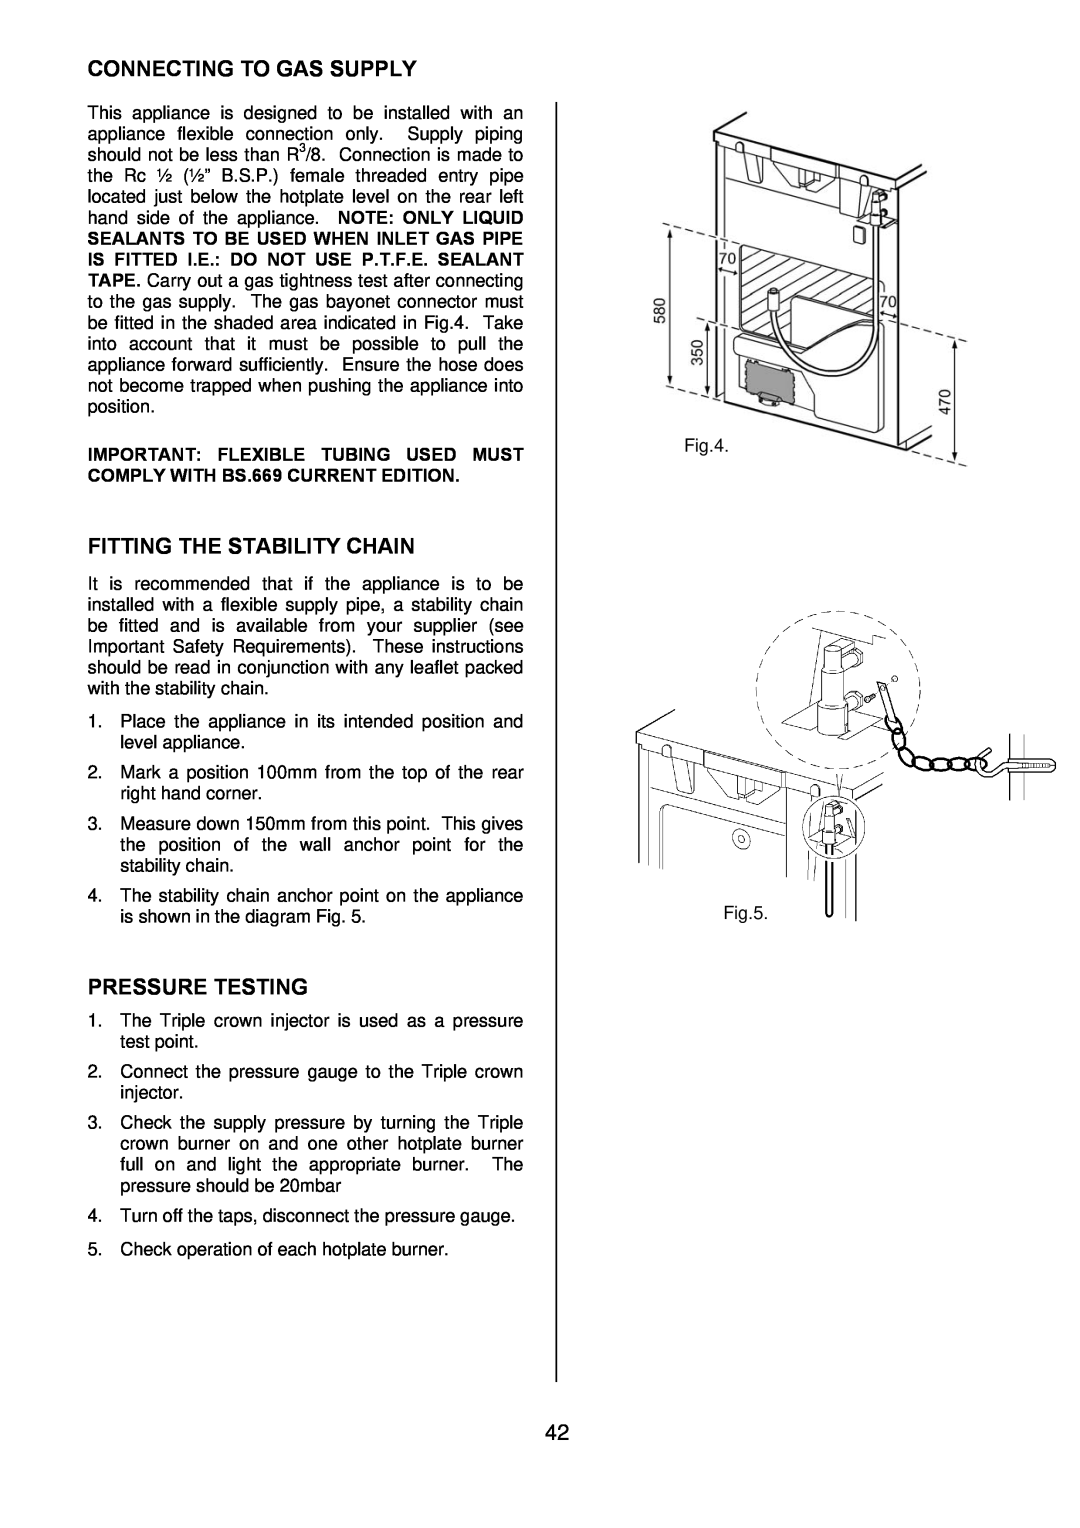 Electrolux D77000GF operating instructions Connecting To Gas Supply, Fitting The Stability Chain, Pressure Testing 